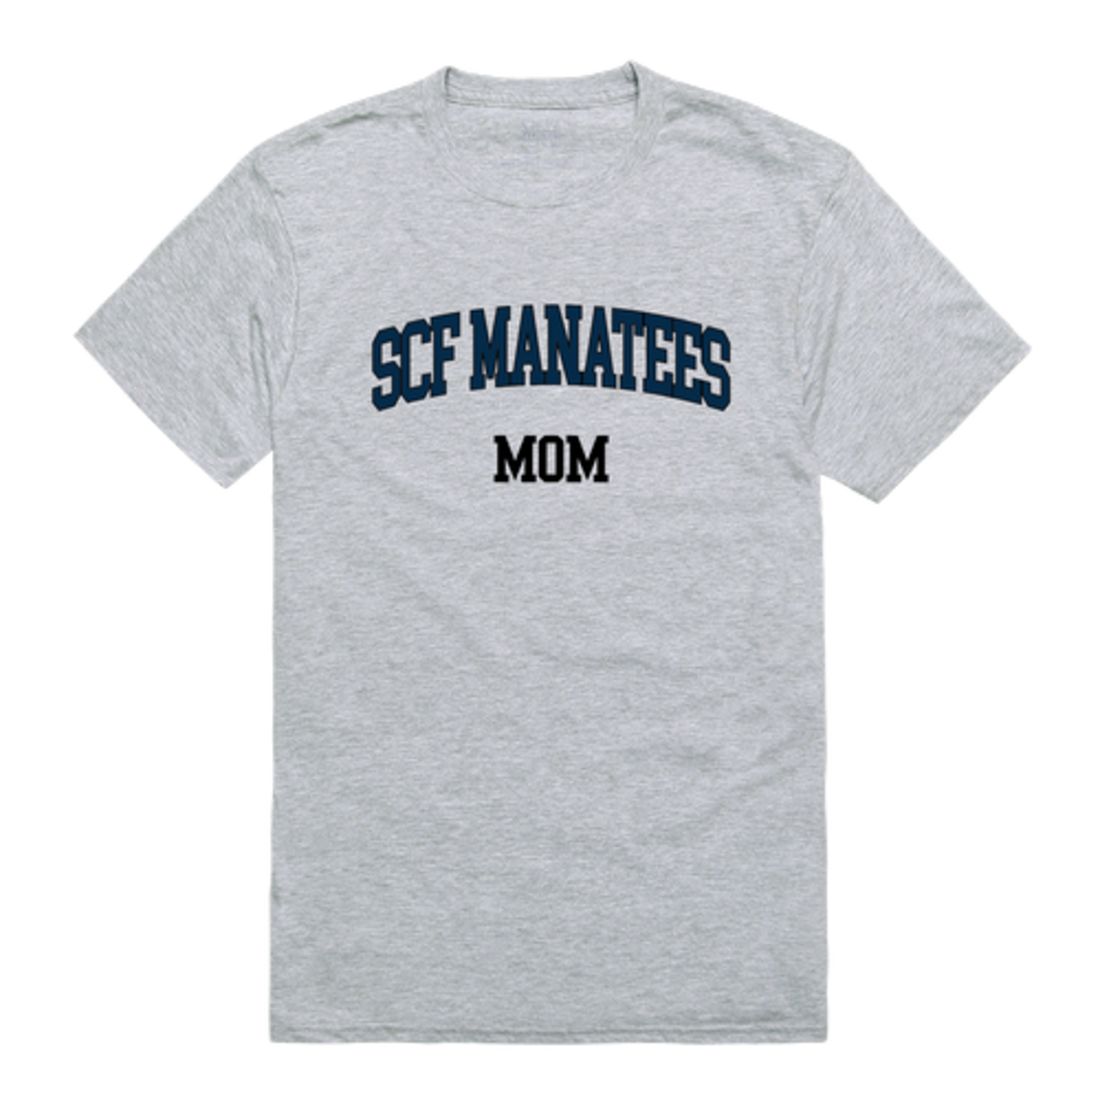 State College of Florida Manatees Mom T-Shirt